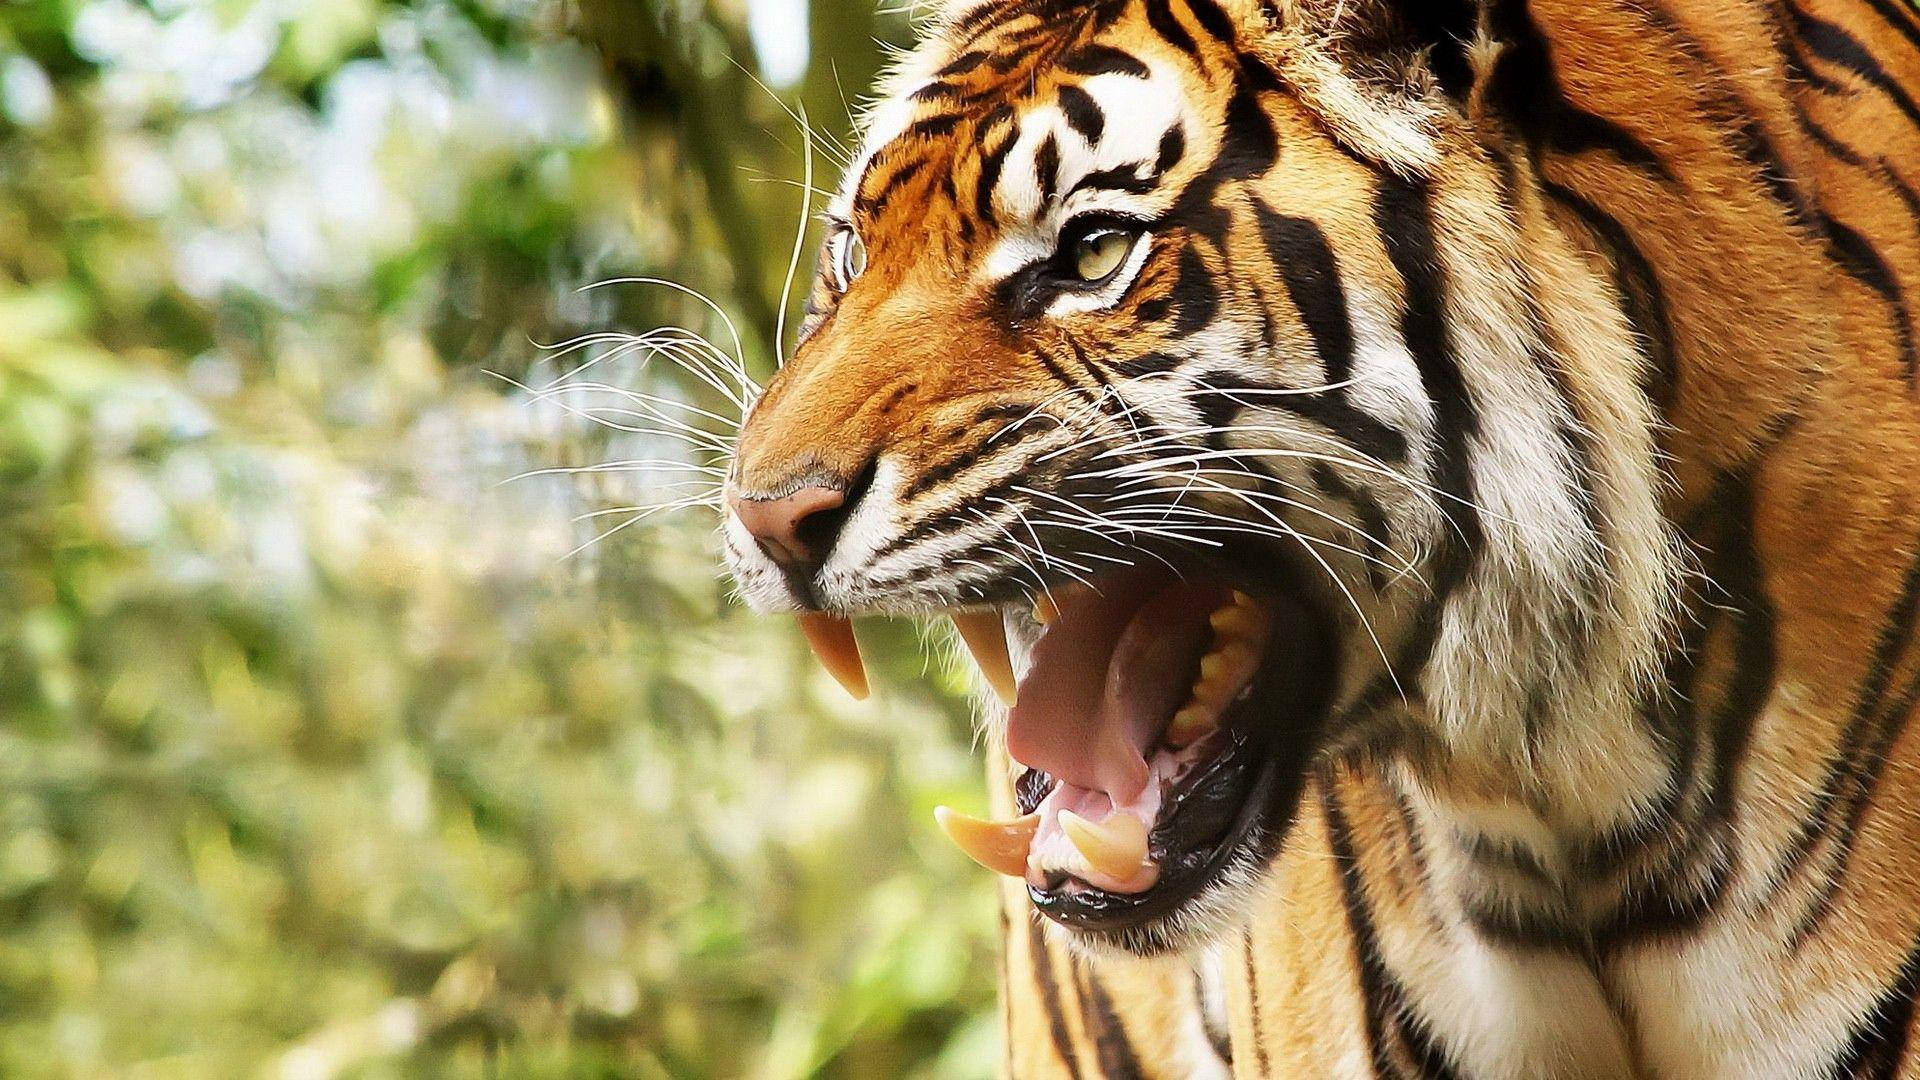 Angry Tiger Side View Wallpaper